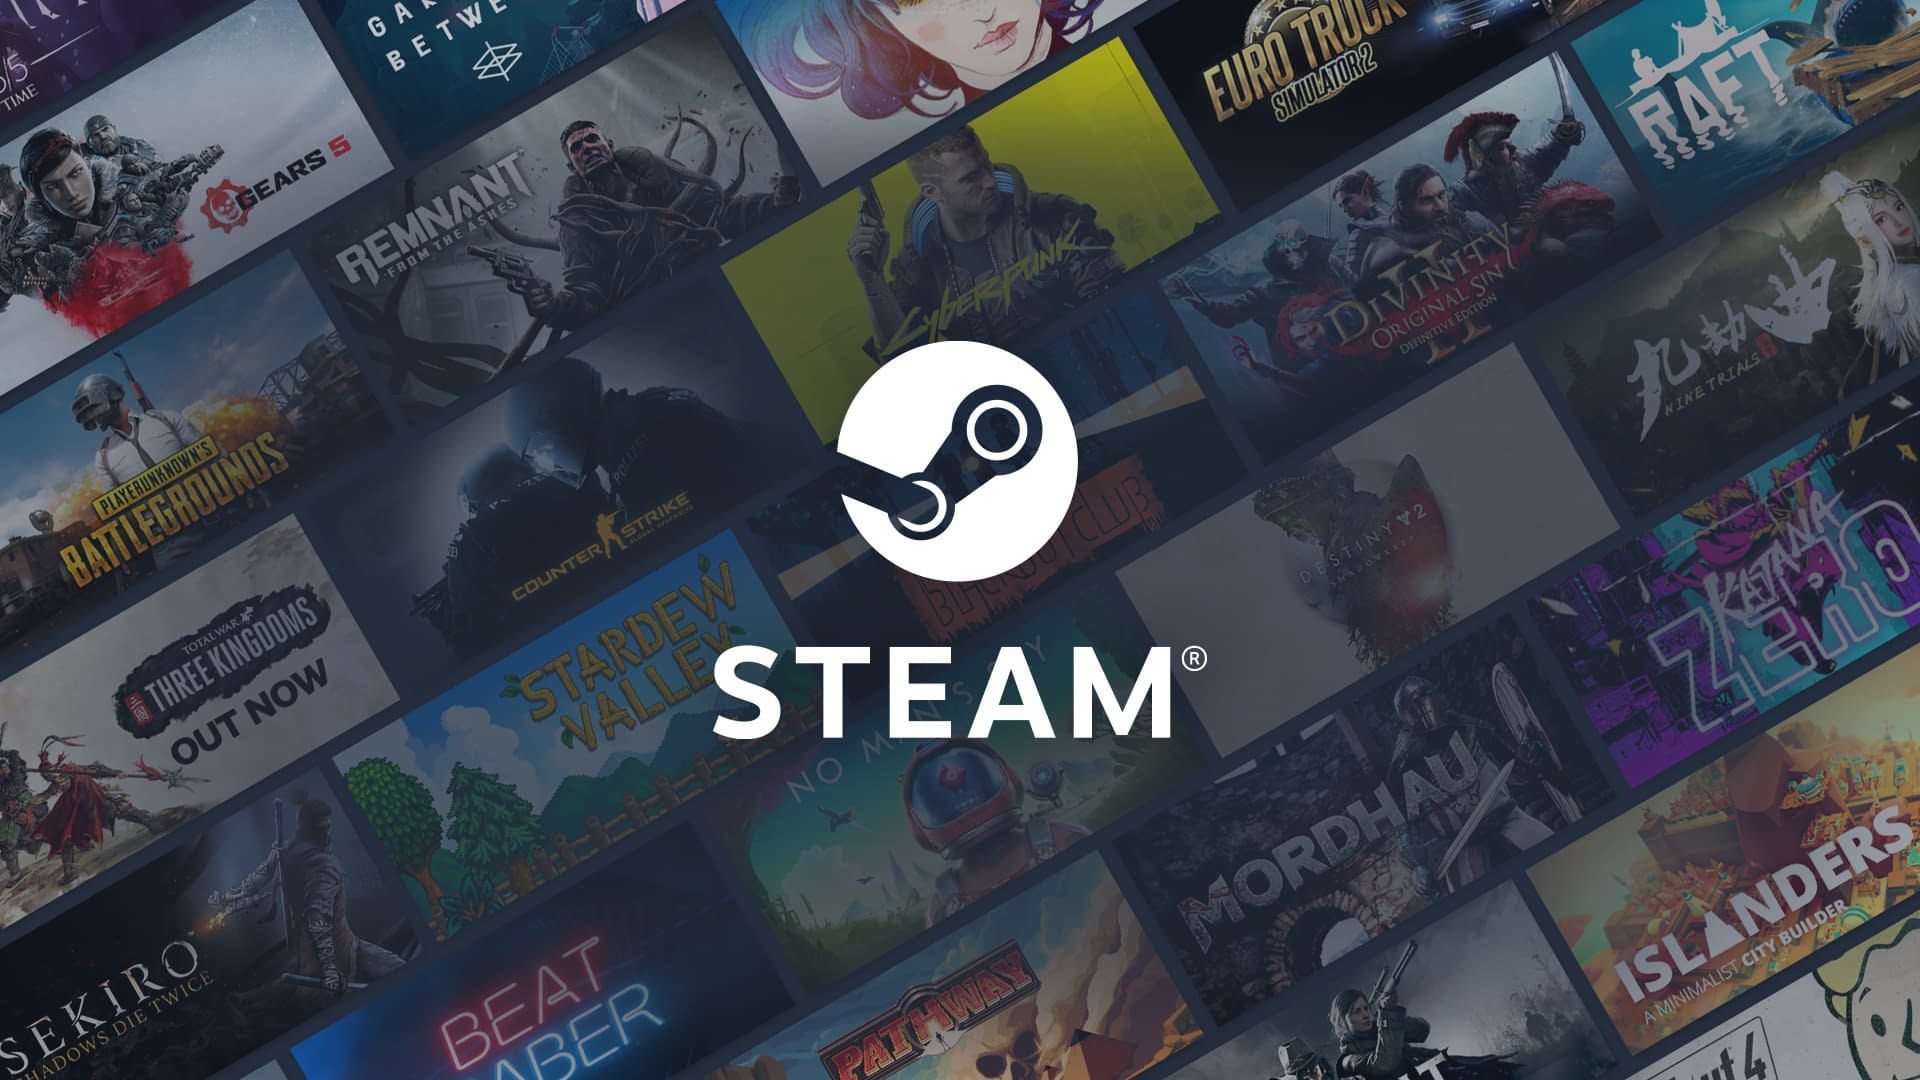 This week on Steam discounts: Deals that are available to 90 percent on the face